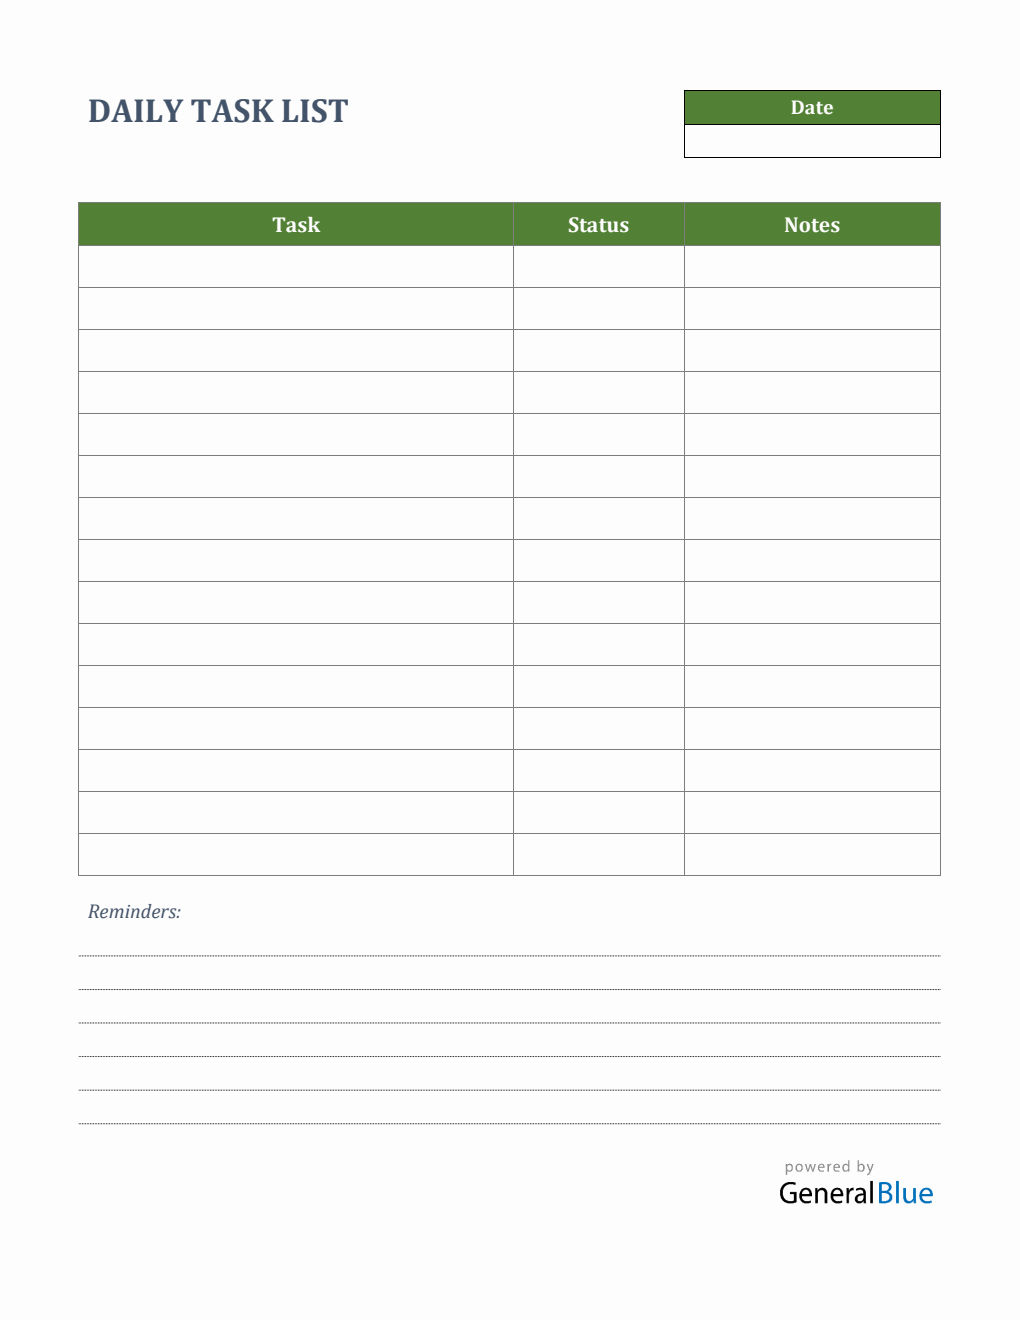 Daily Task List Template in Word